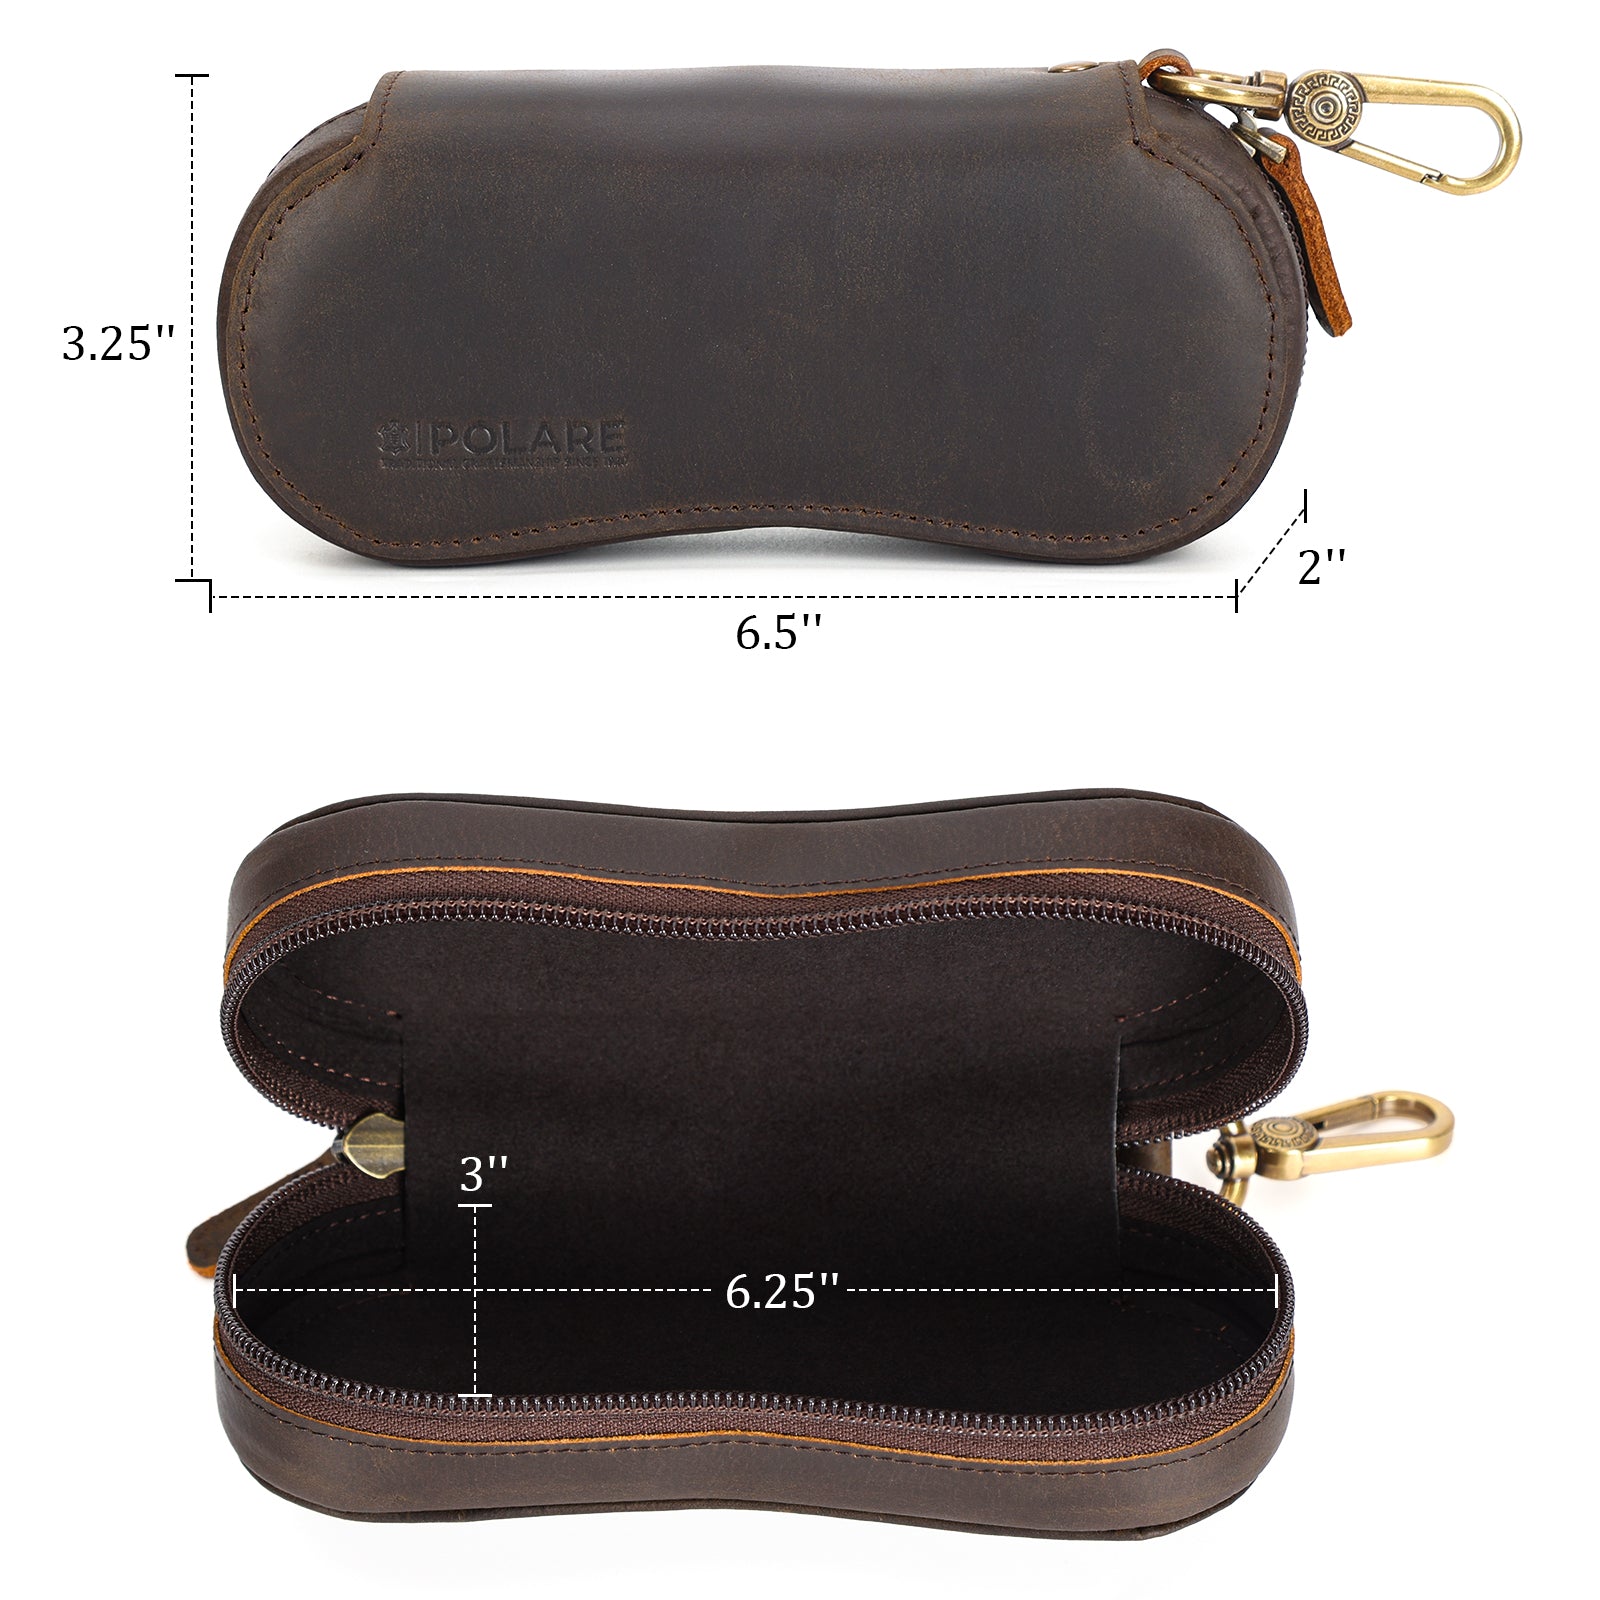 Full Grain Leather Glasses Case Safety Sunglasses Case with YKK Zipper (Dimension)